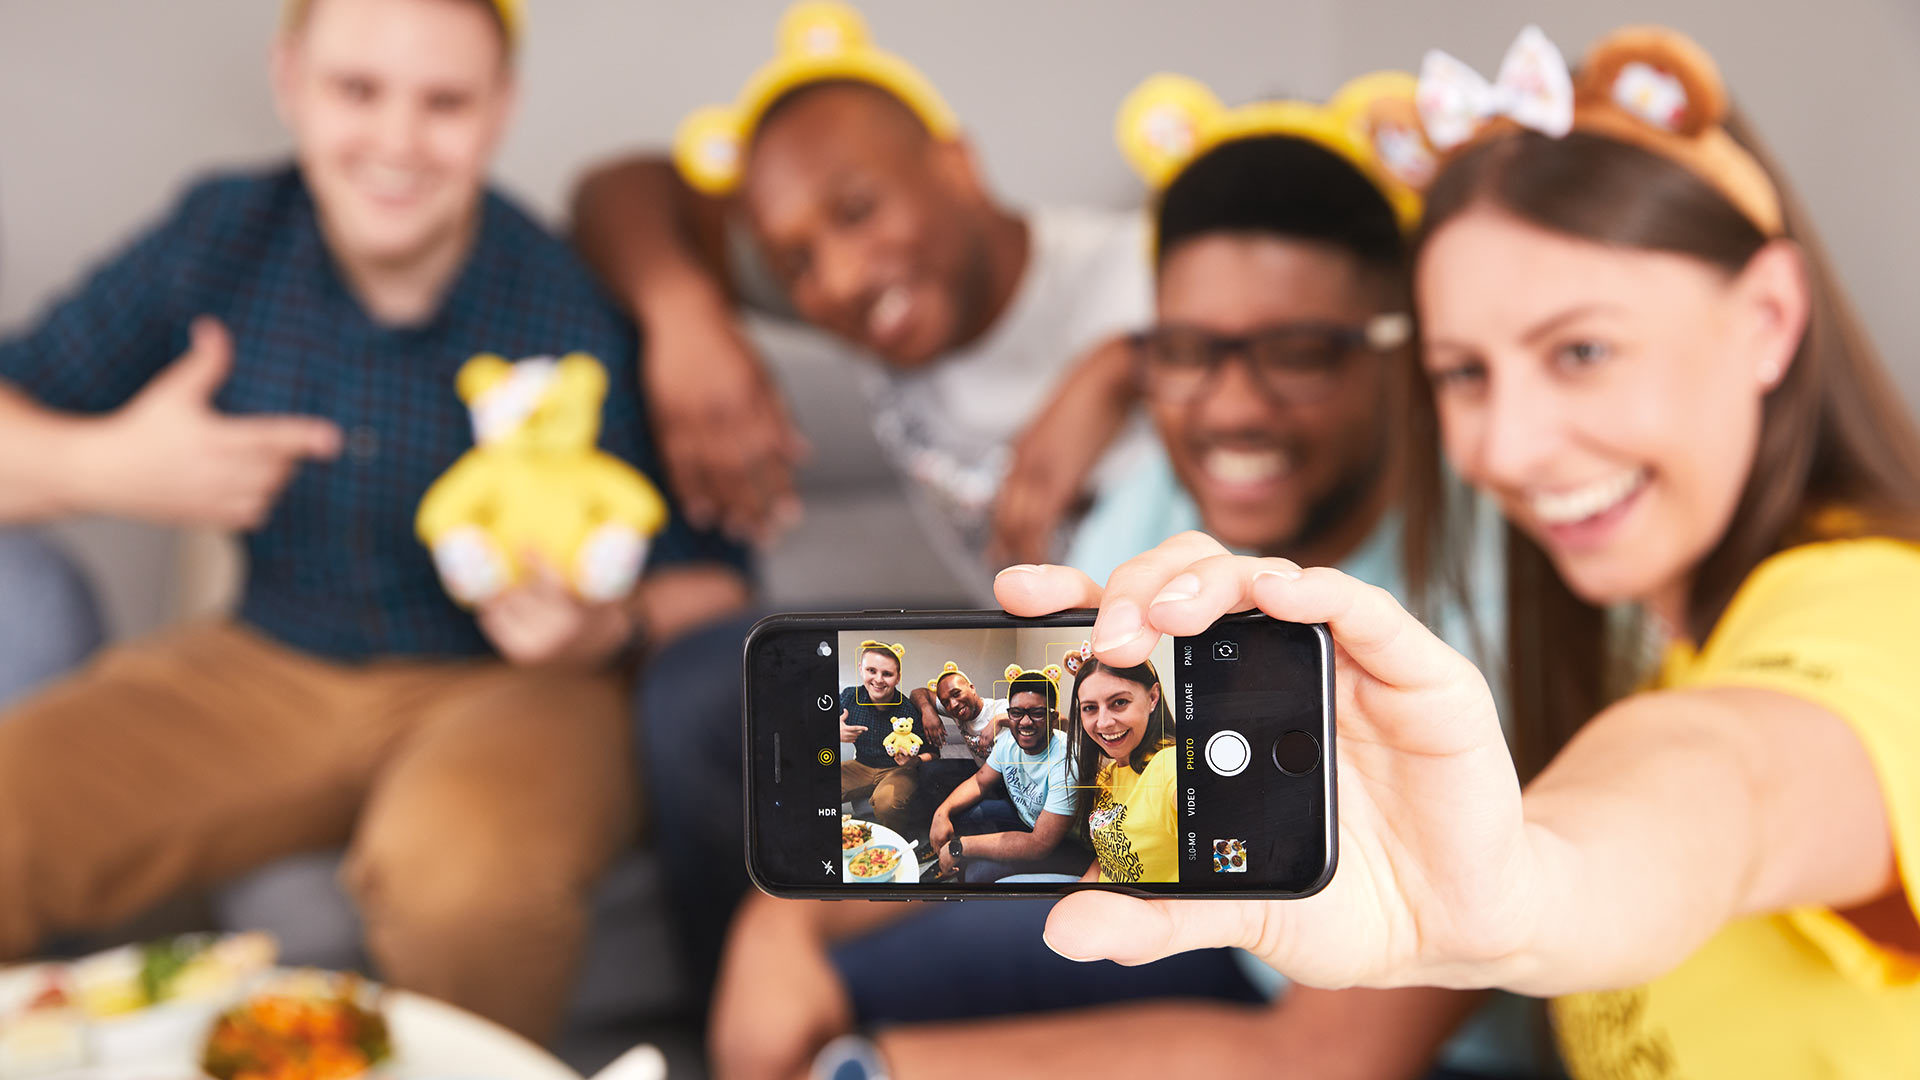 A group of friends wearing Pudsey ears taking a selfie with different curry dishes in front of them.